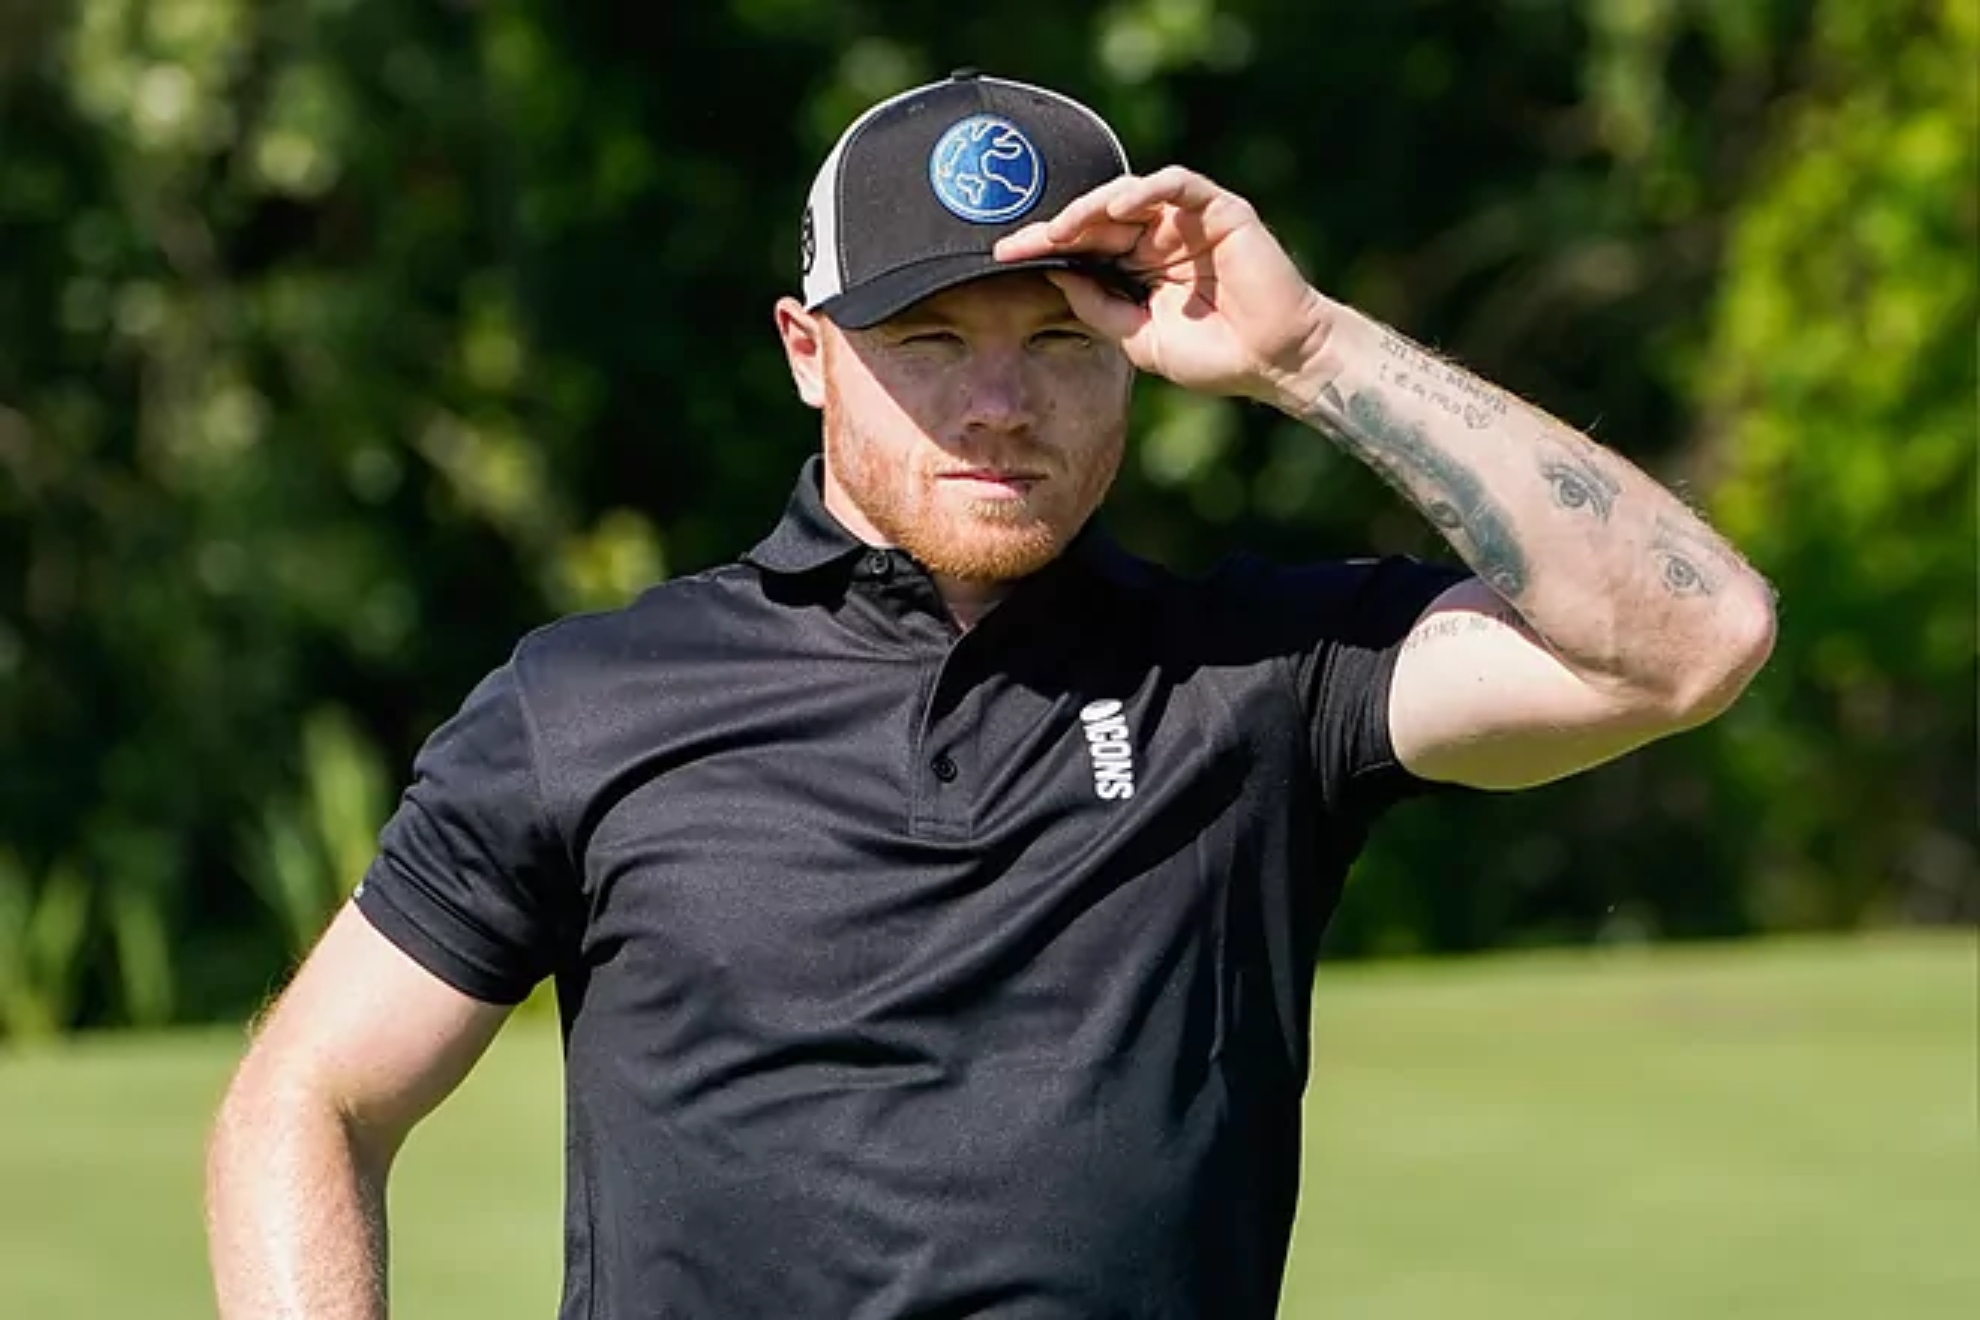 Canelo lvarez puts his golf clubs on the shelf to concentrate on the Jermell Charlo fight